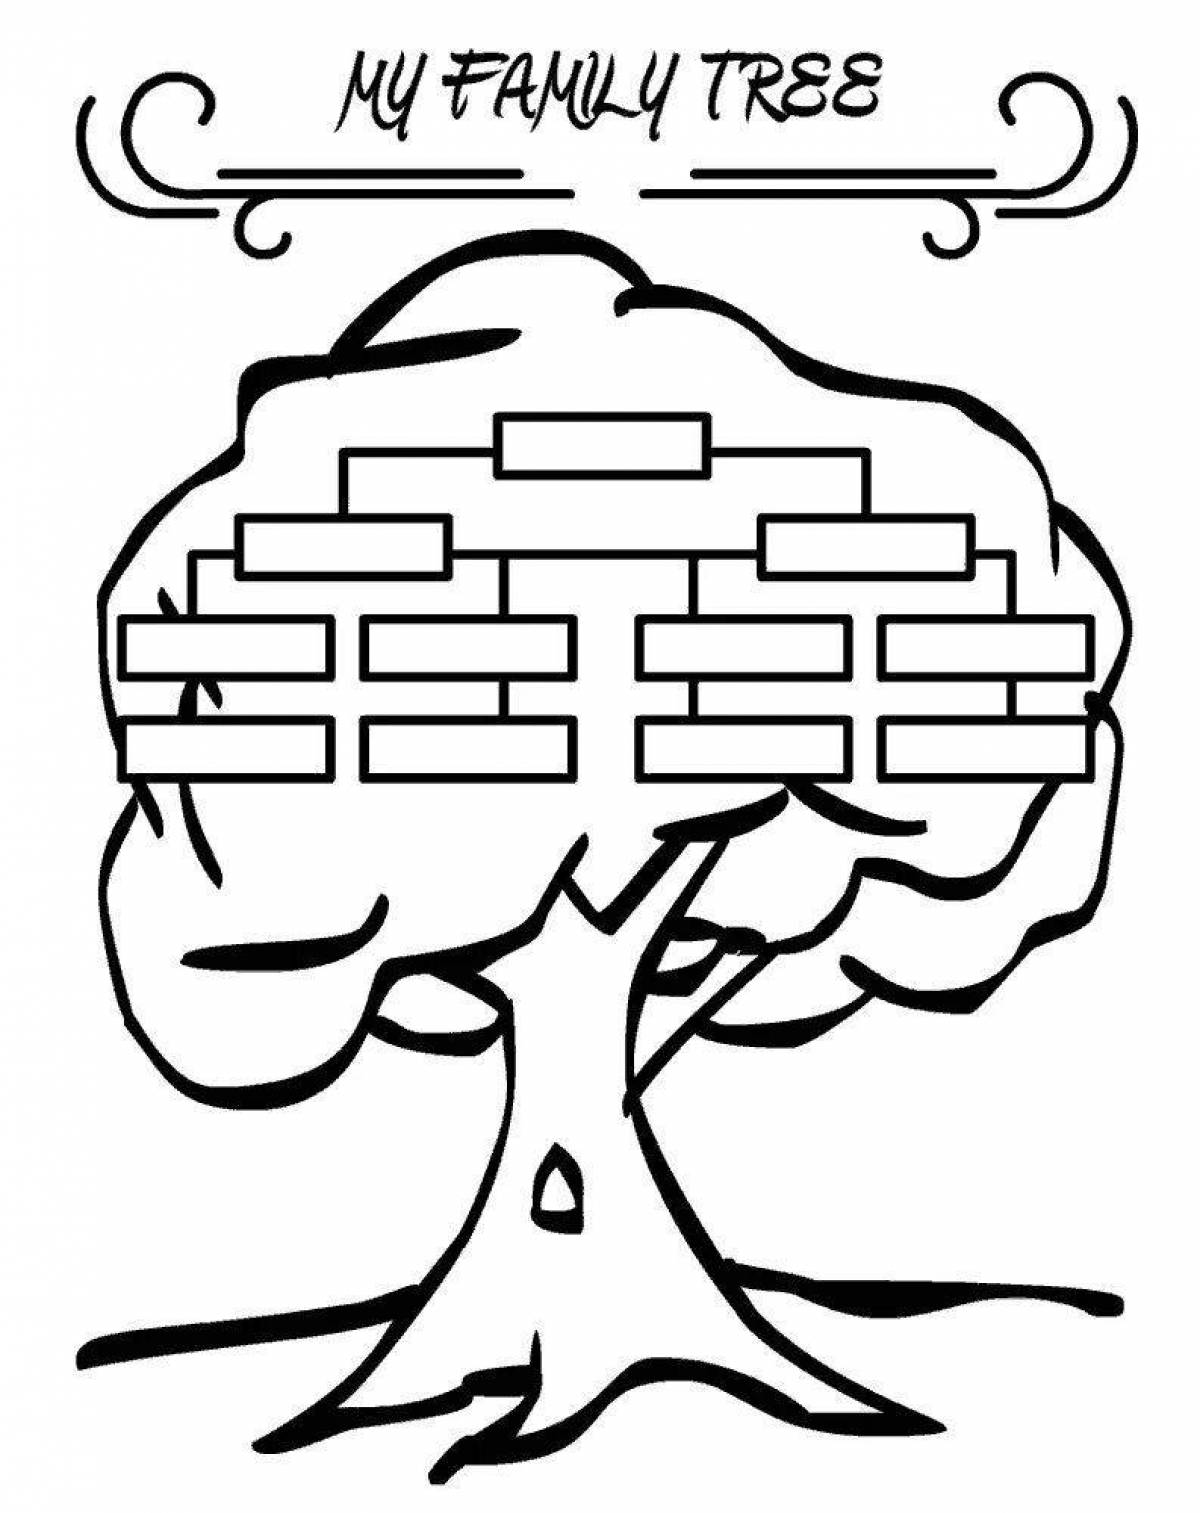 Colorific family tree coloring page